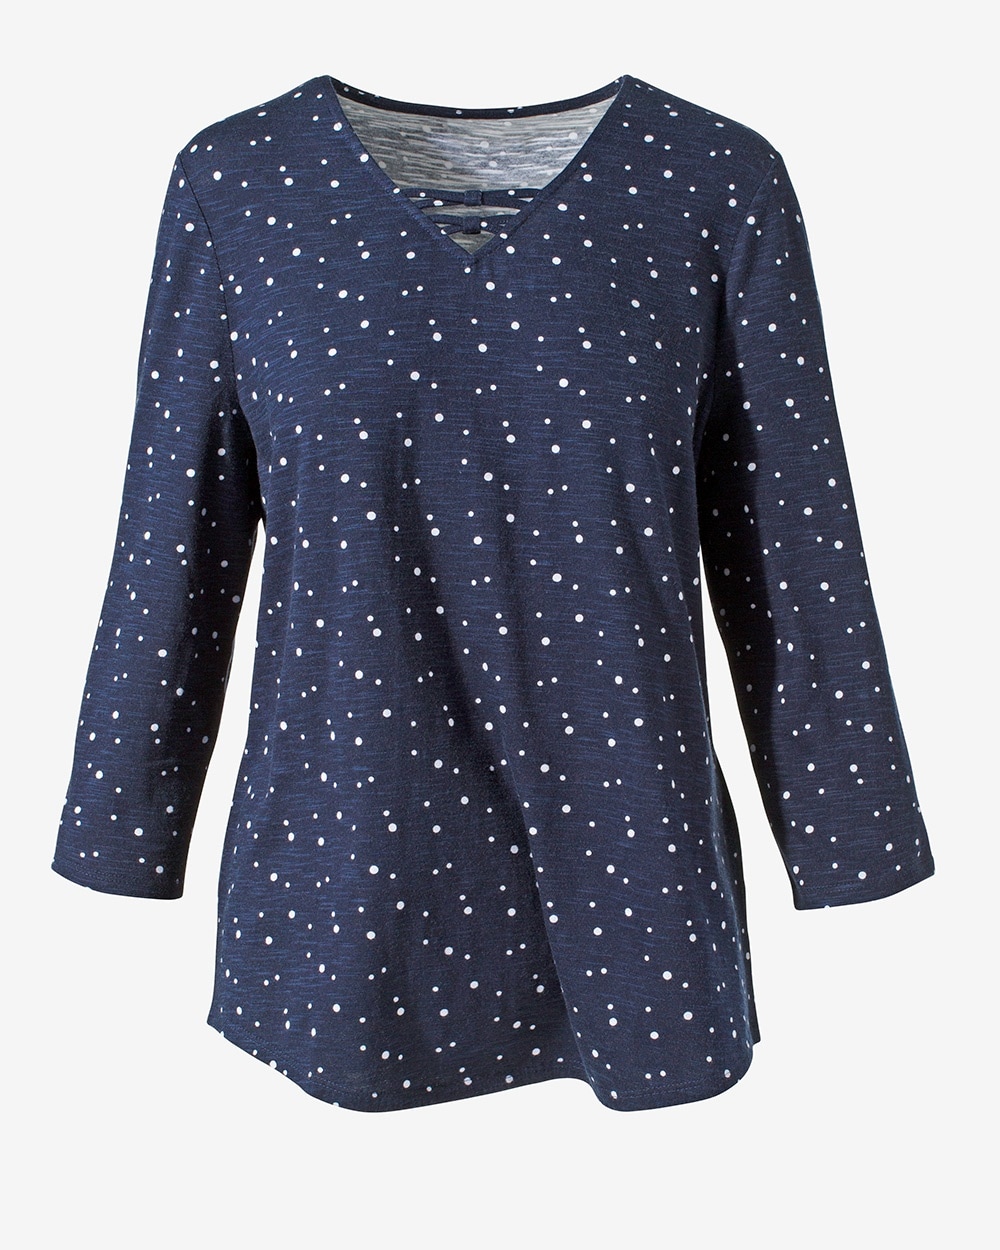 Scattered Dots Bow 3/4-Sleeve Top